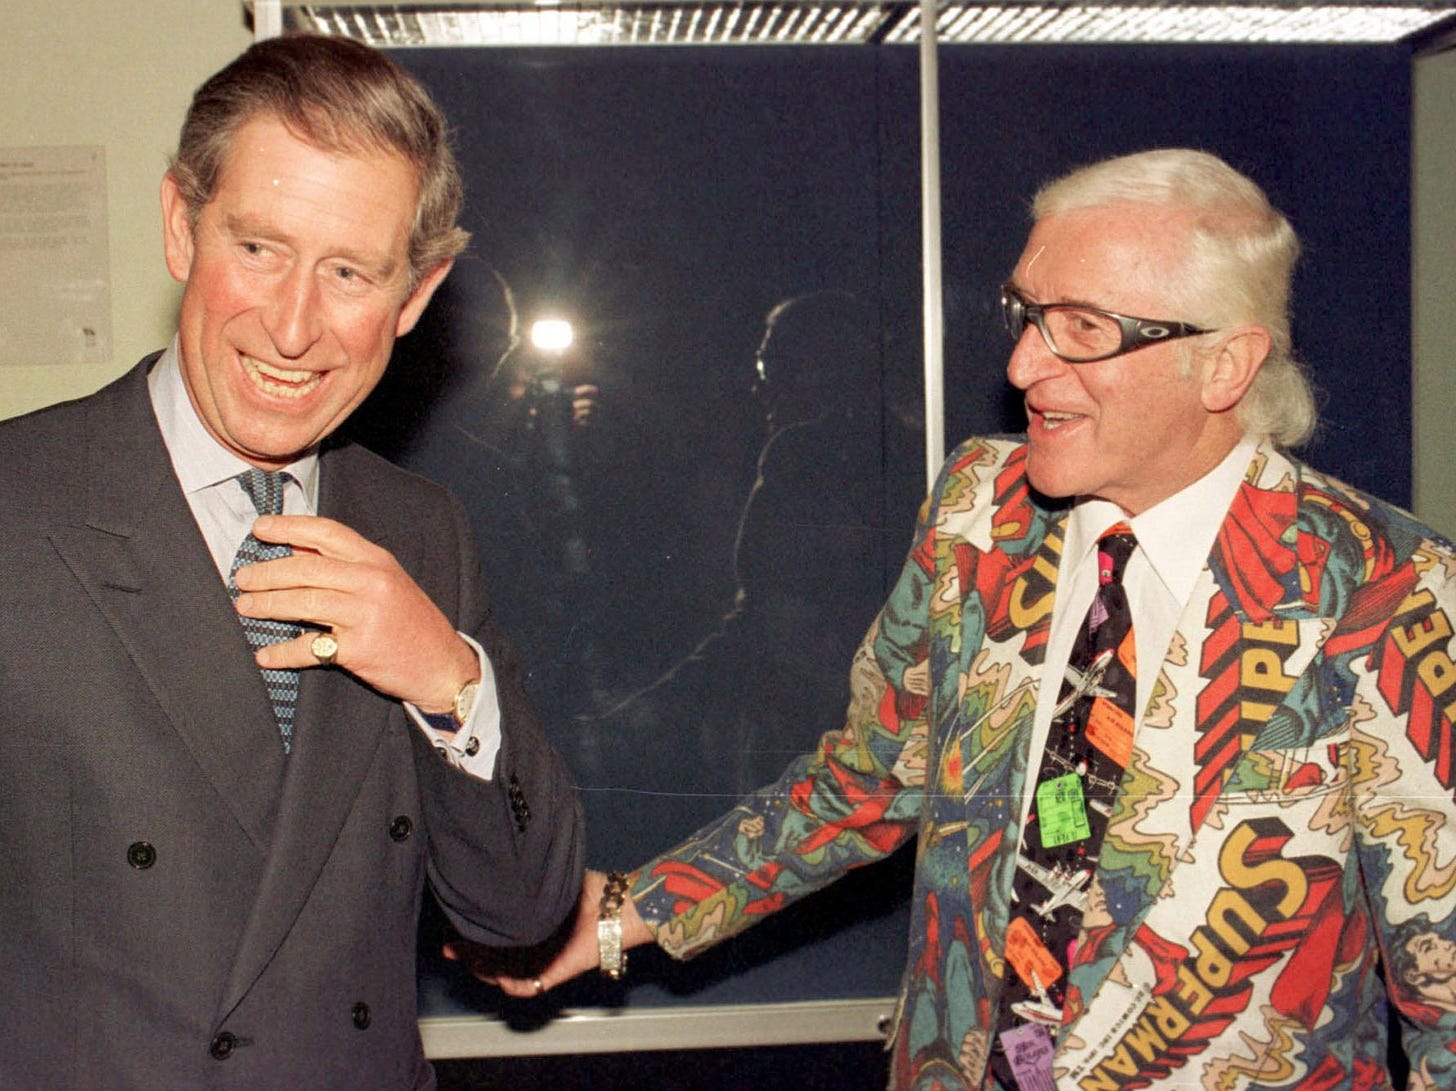 Prince Charles wrote to Jimmy Savile for PR advice, newly revealed letters  claim | The Independent